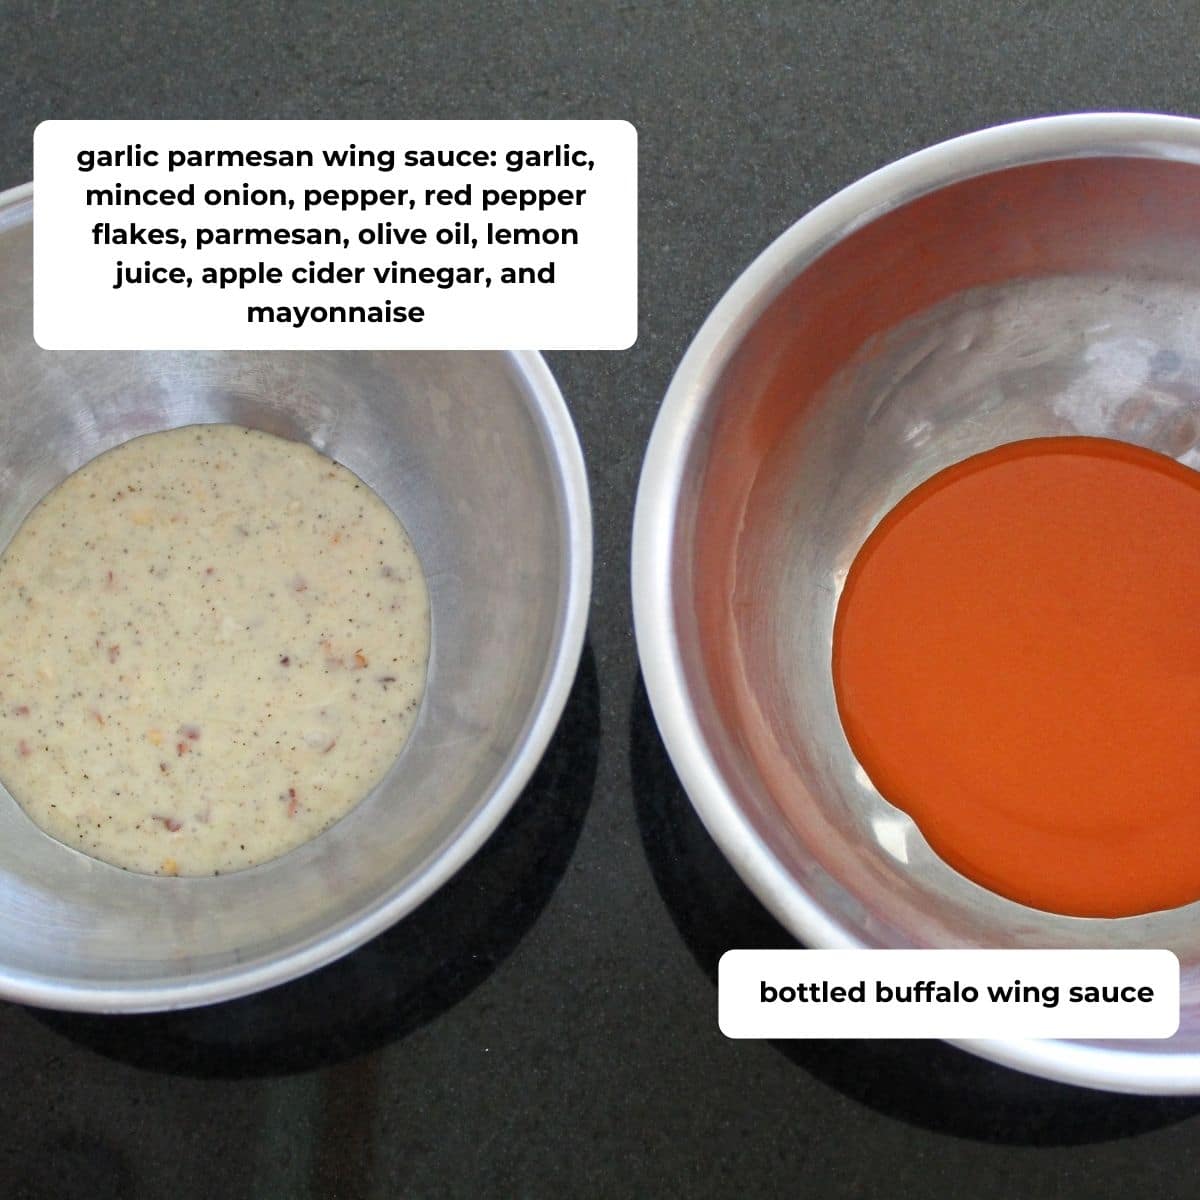 overhead shot of two bowls of chicken wing sauce with descriptive text overlay.